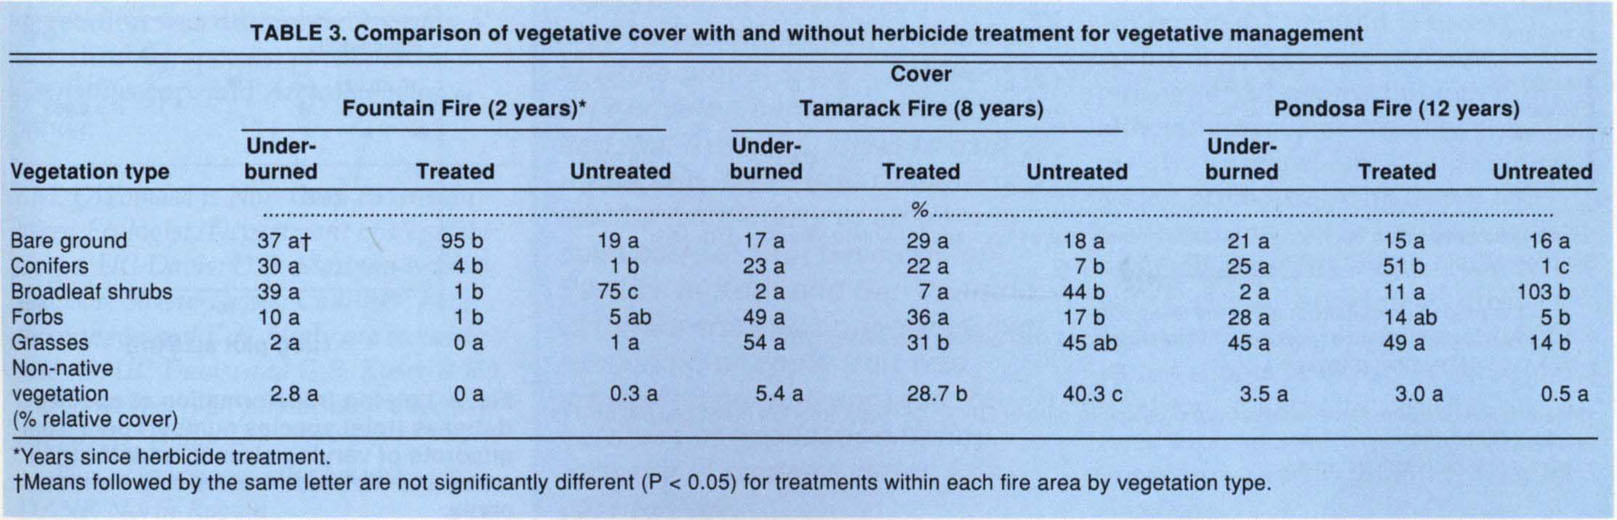 Comparison of vegetative cover with and without herbicide treatment for vegetative management